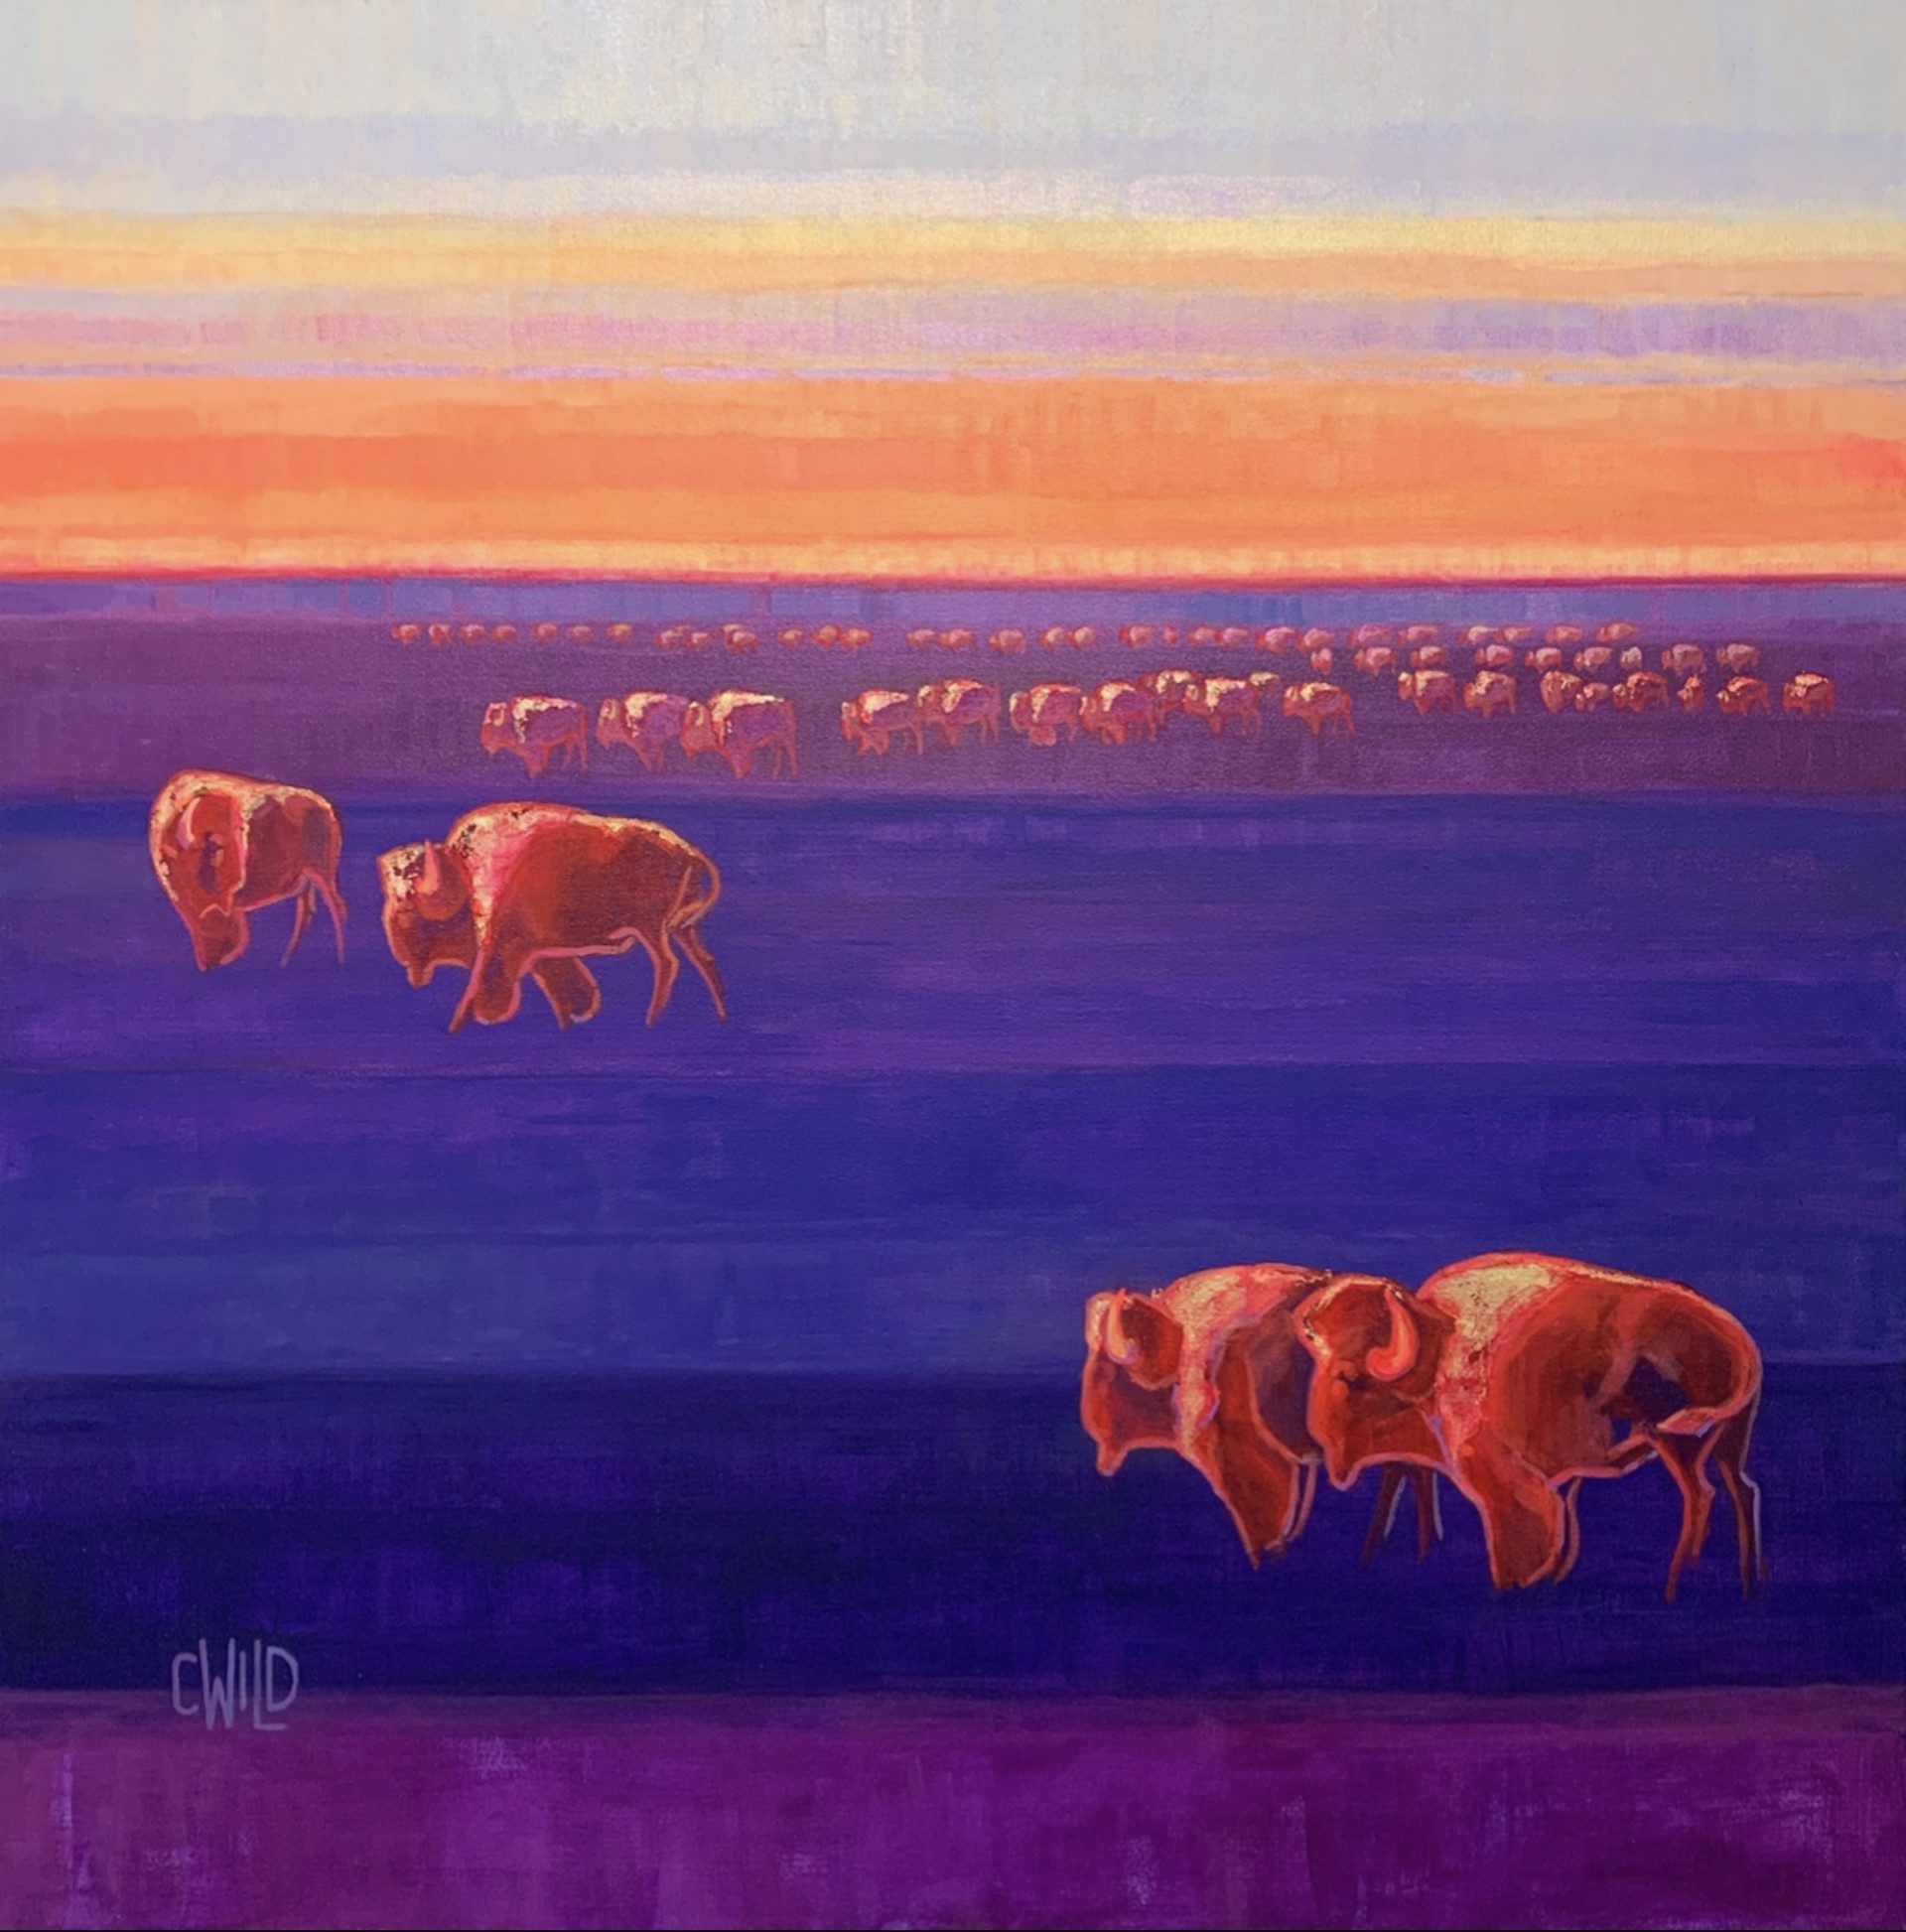 Original Contemporary Painting Of A Herd Of Red Bison Migrating Featuring A Blue Orange And Purple Landscape By Carrie Wild Available At Gallery Wild